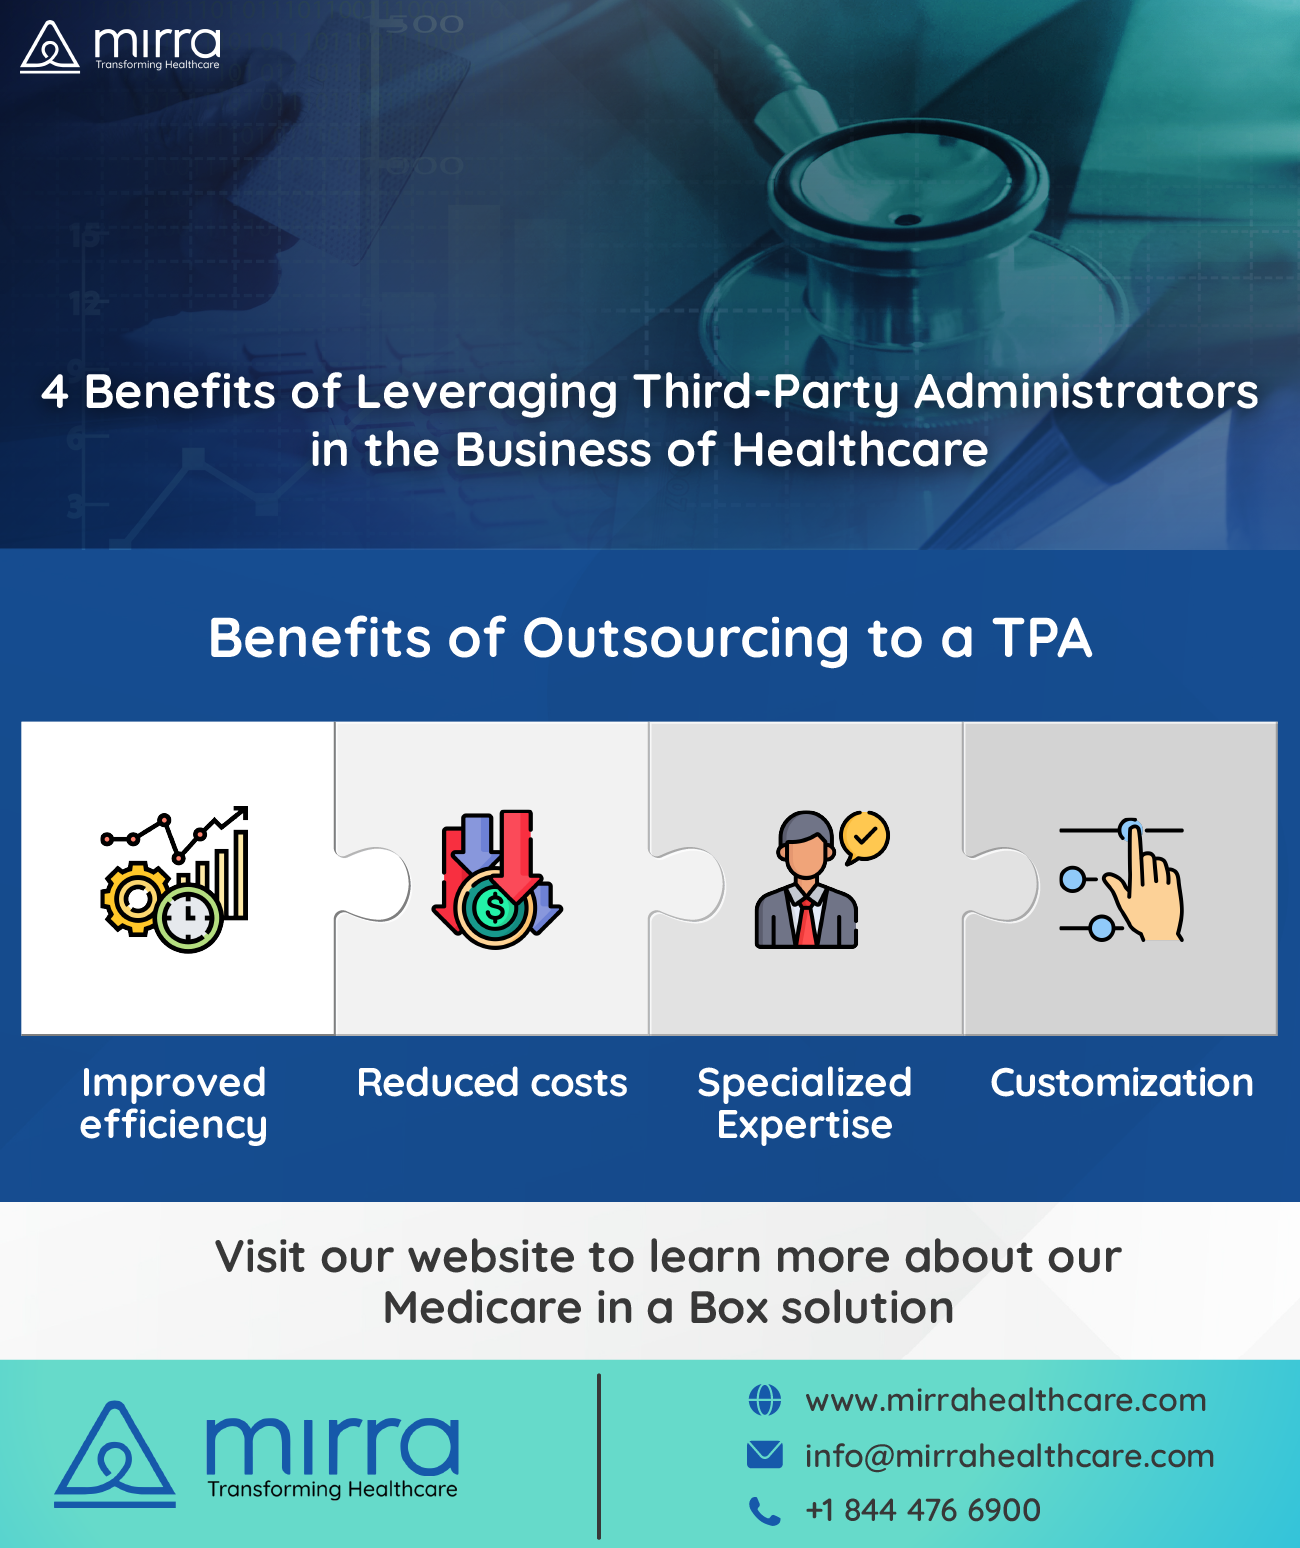 Why Choose Mirra Healthcare as Your Third-Party Administrator?